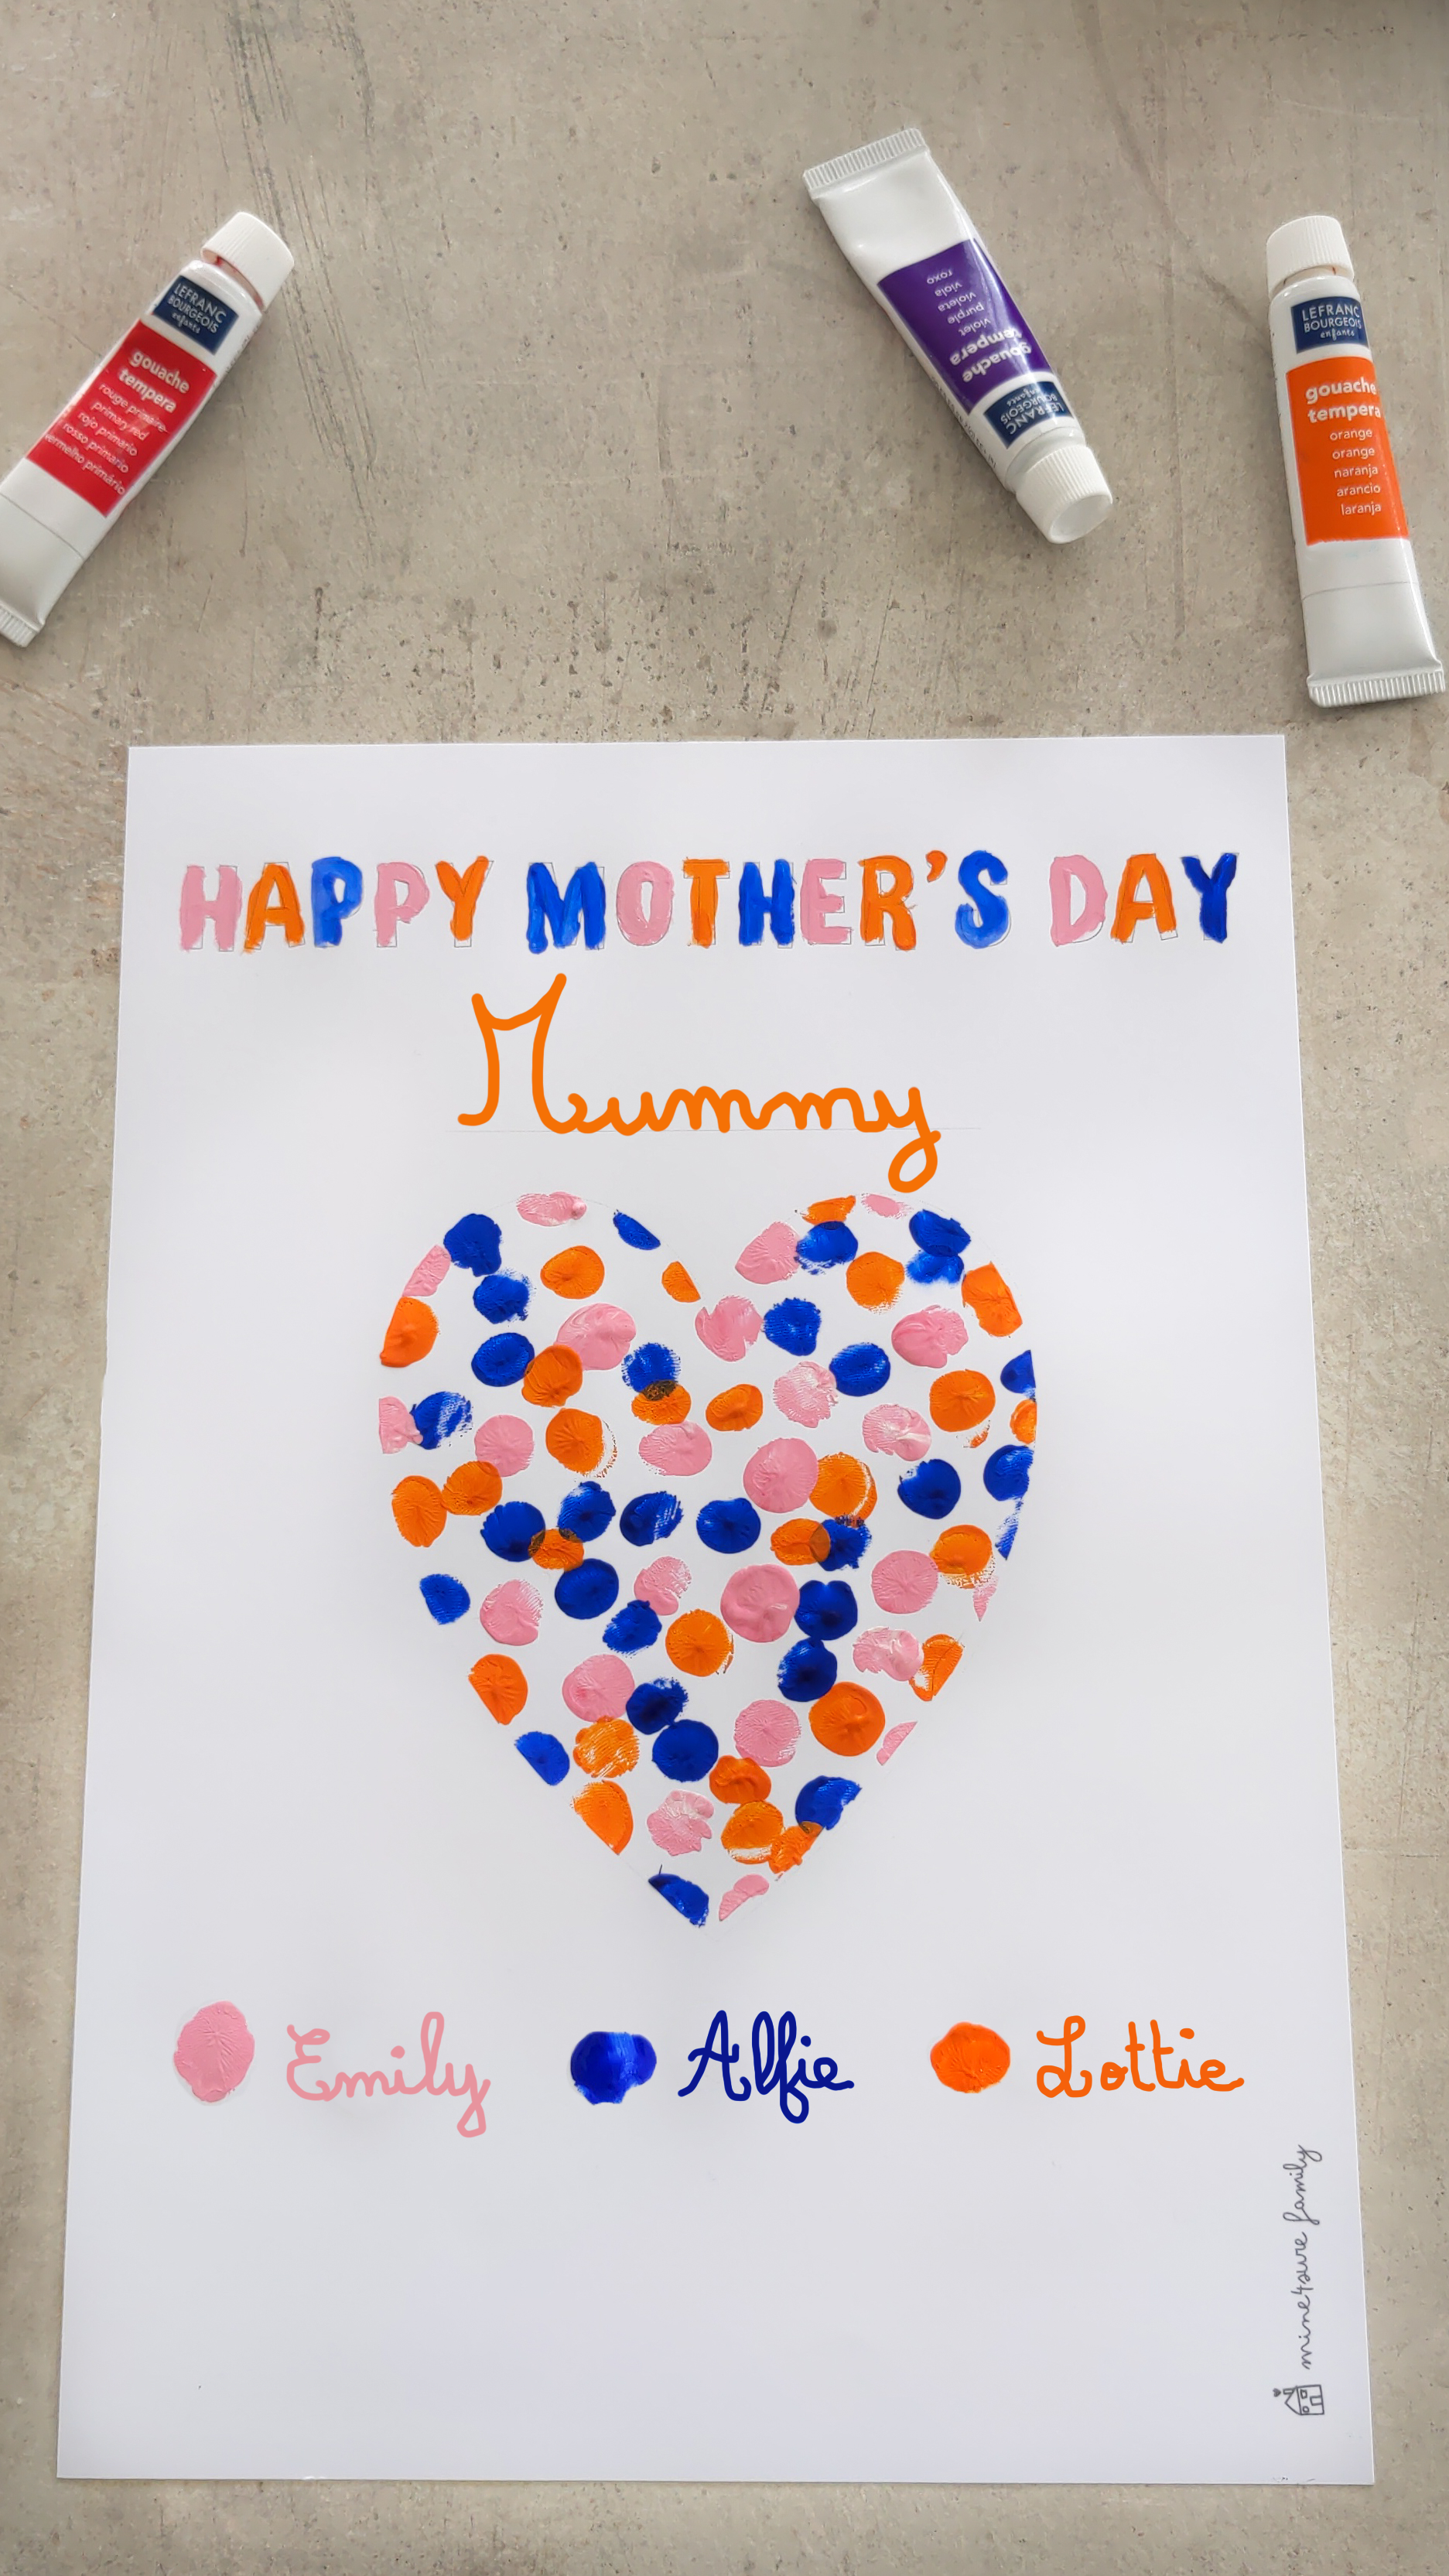 Finger paint mother's day DIY